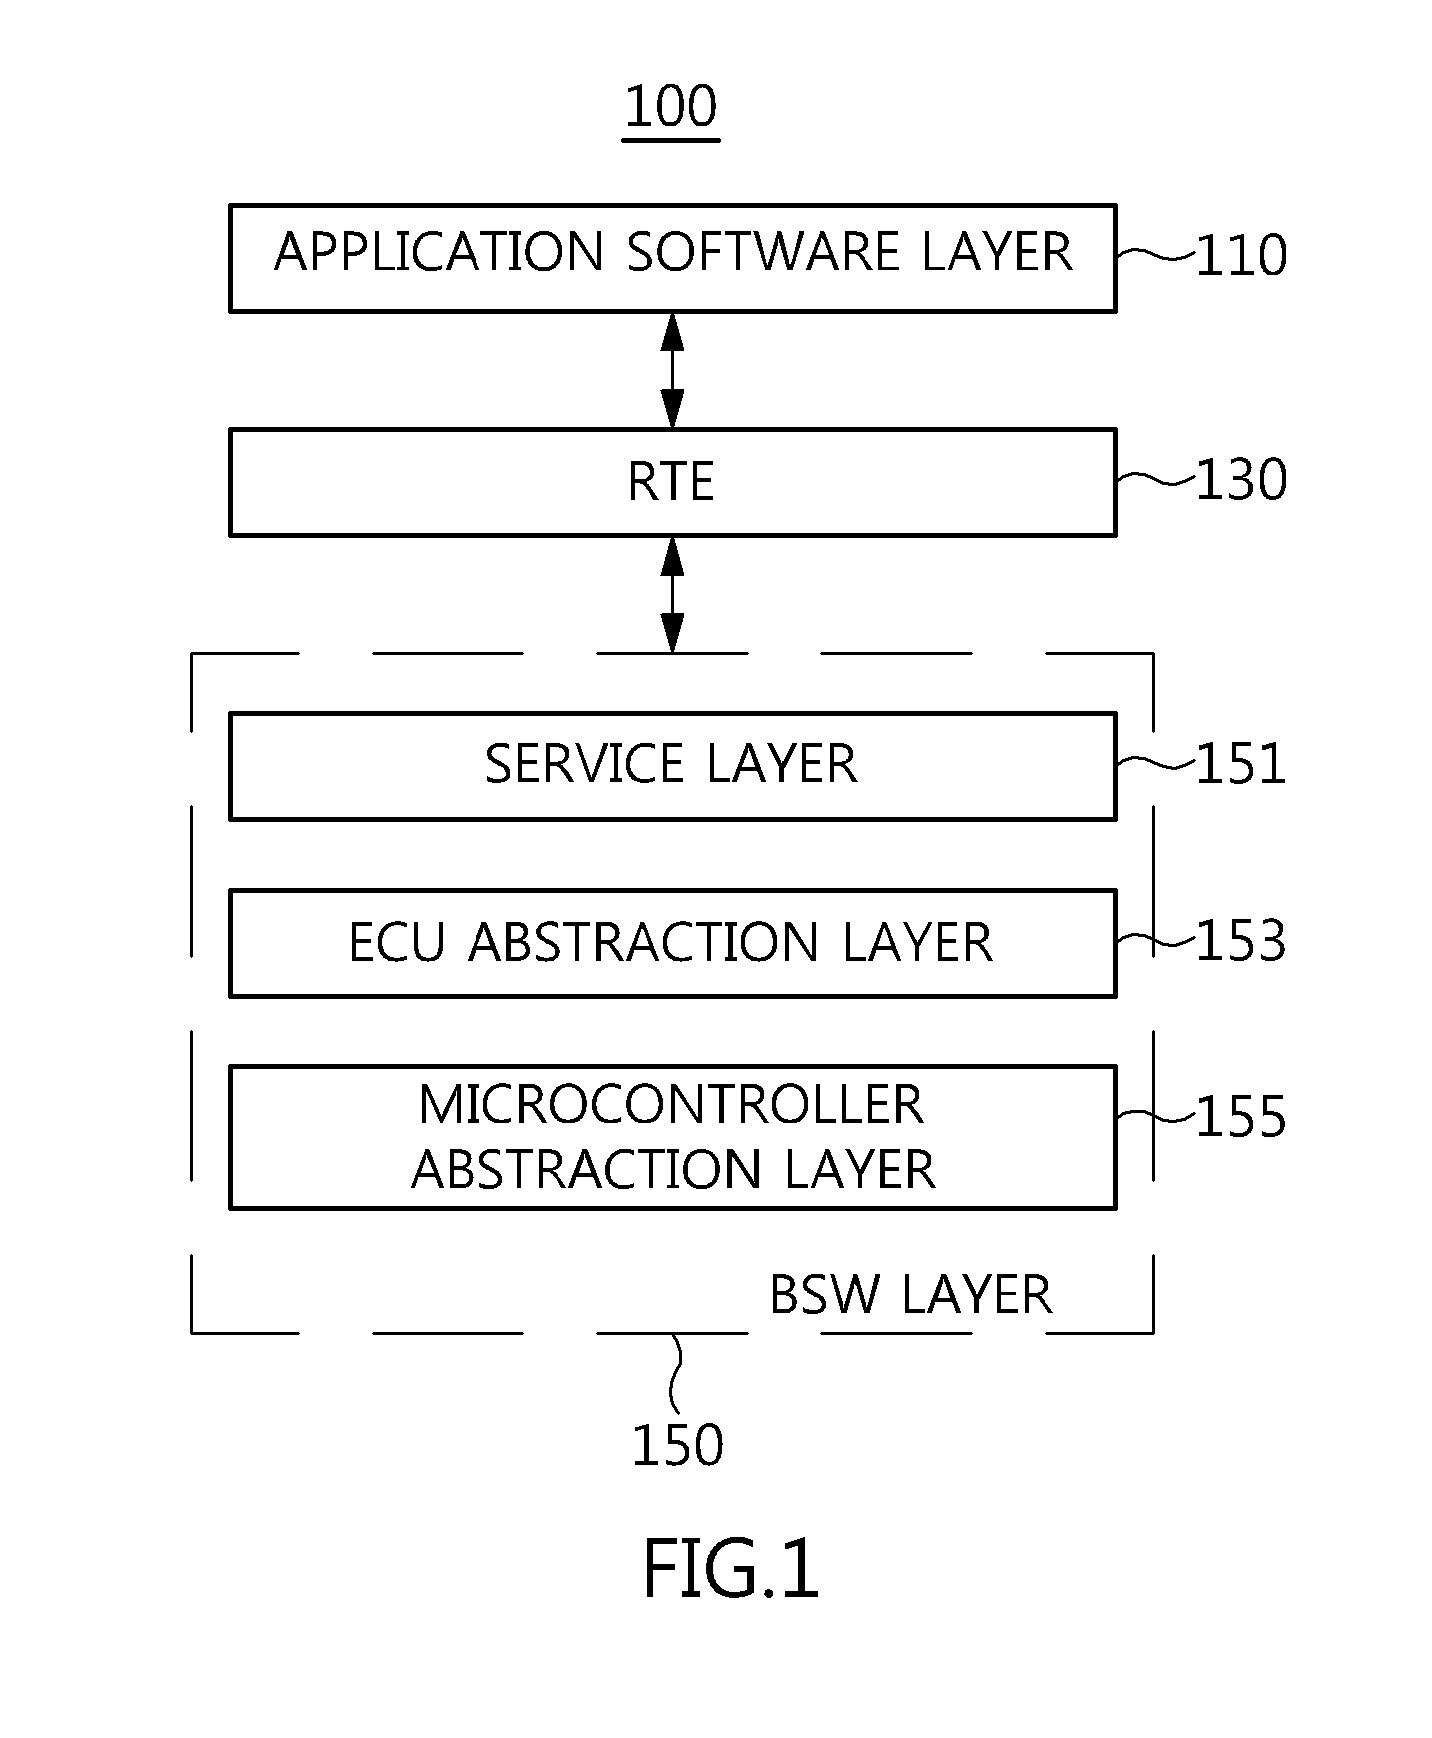 Apparatus and method for verifying interoperability between application software and autosar service